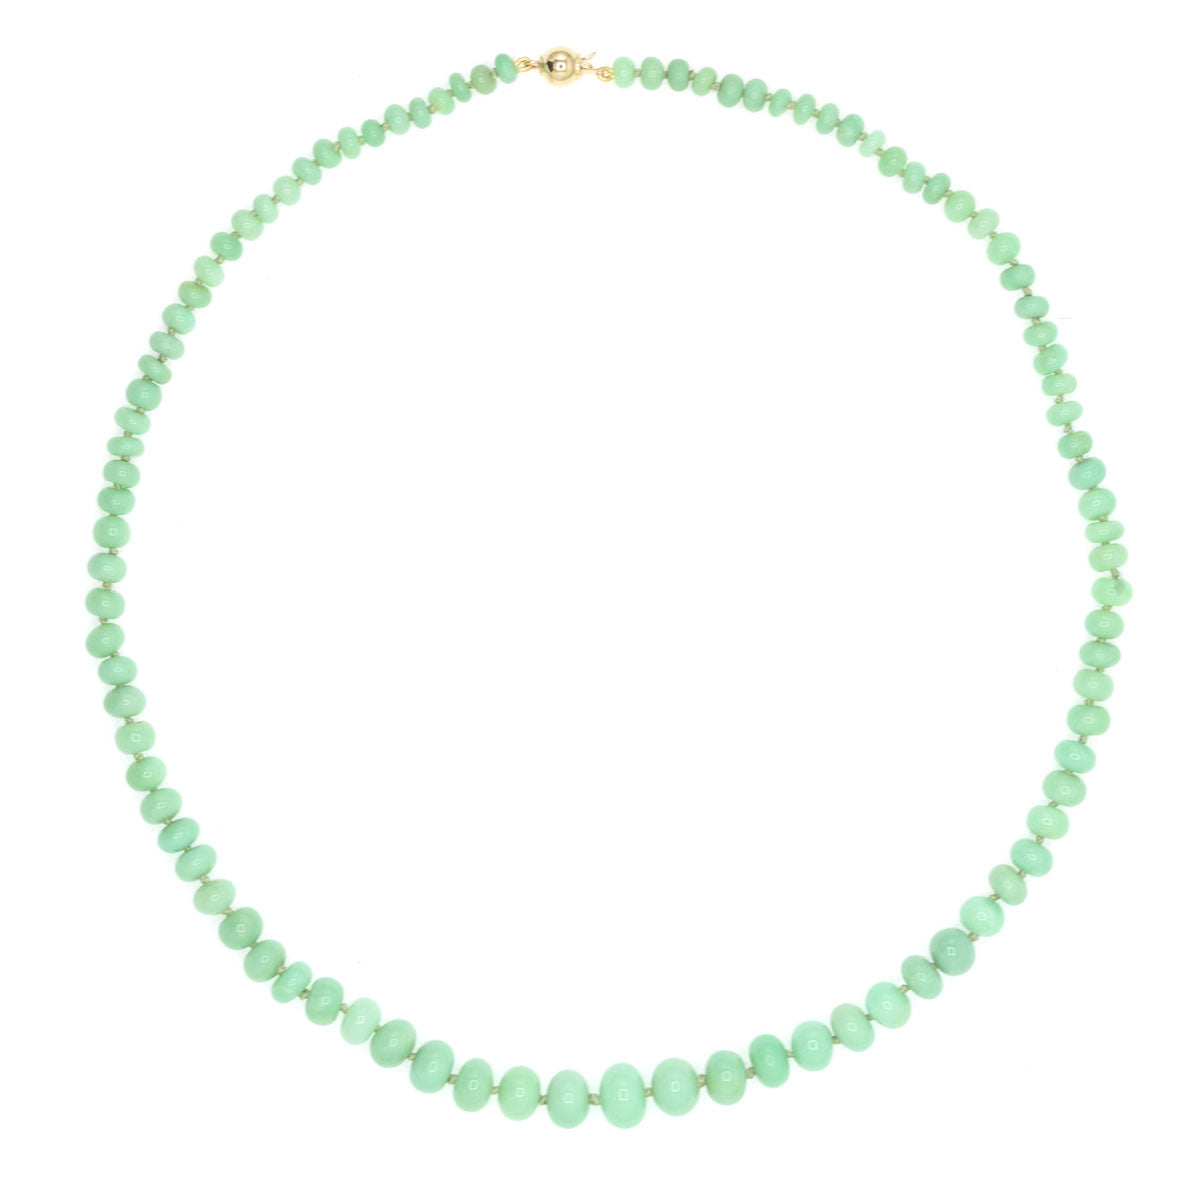 Beaded Chrysoprase Necklace - Large, Bright Green